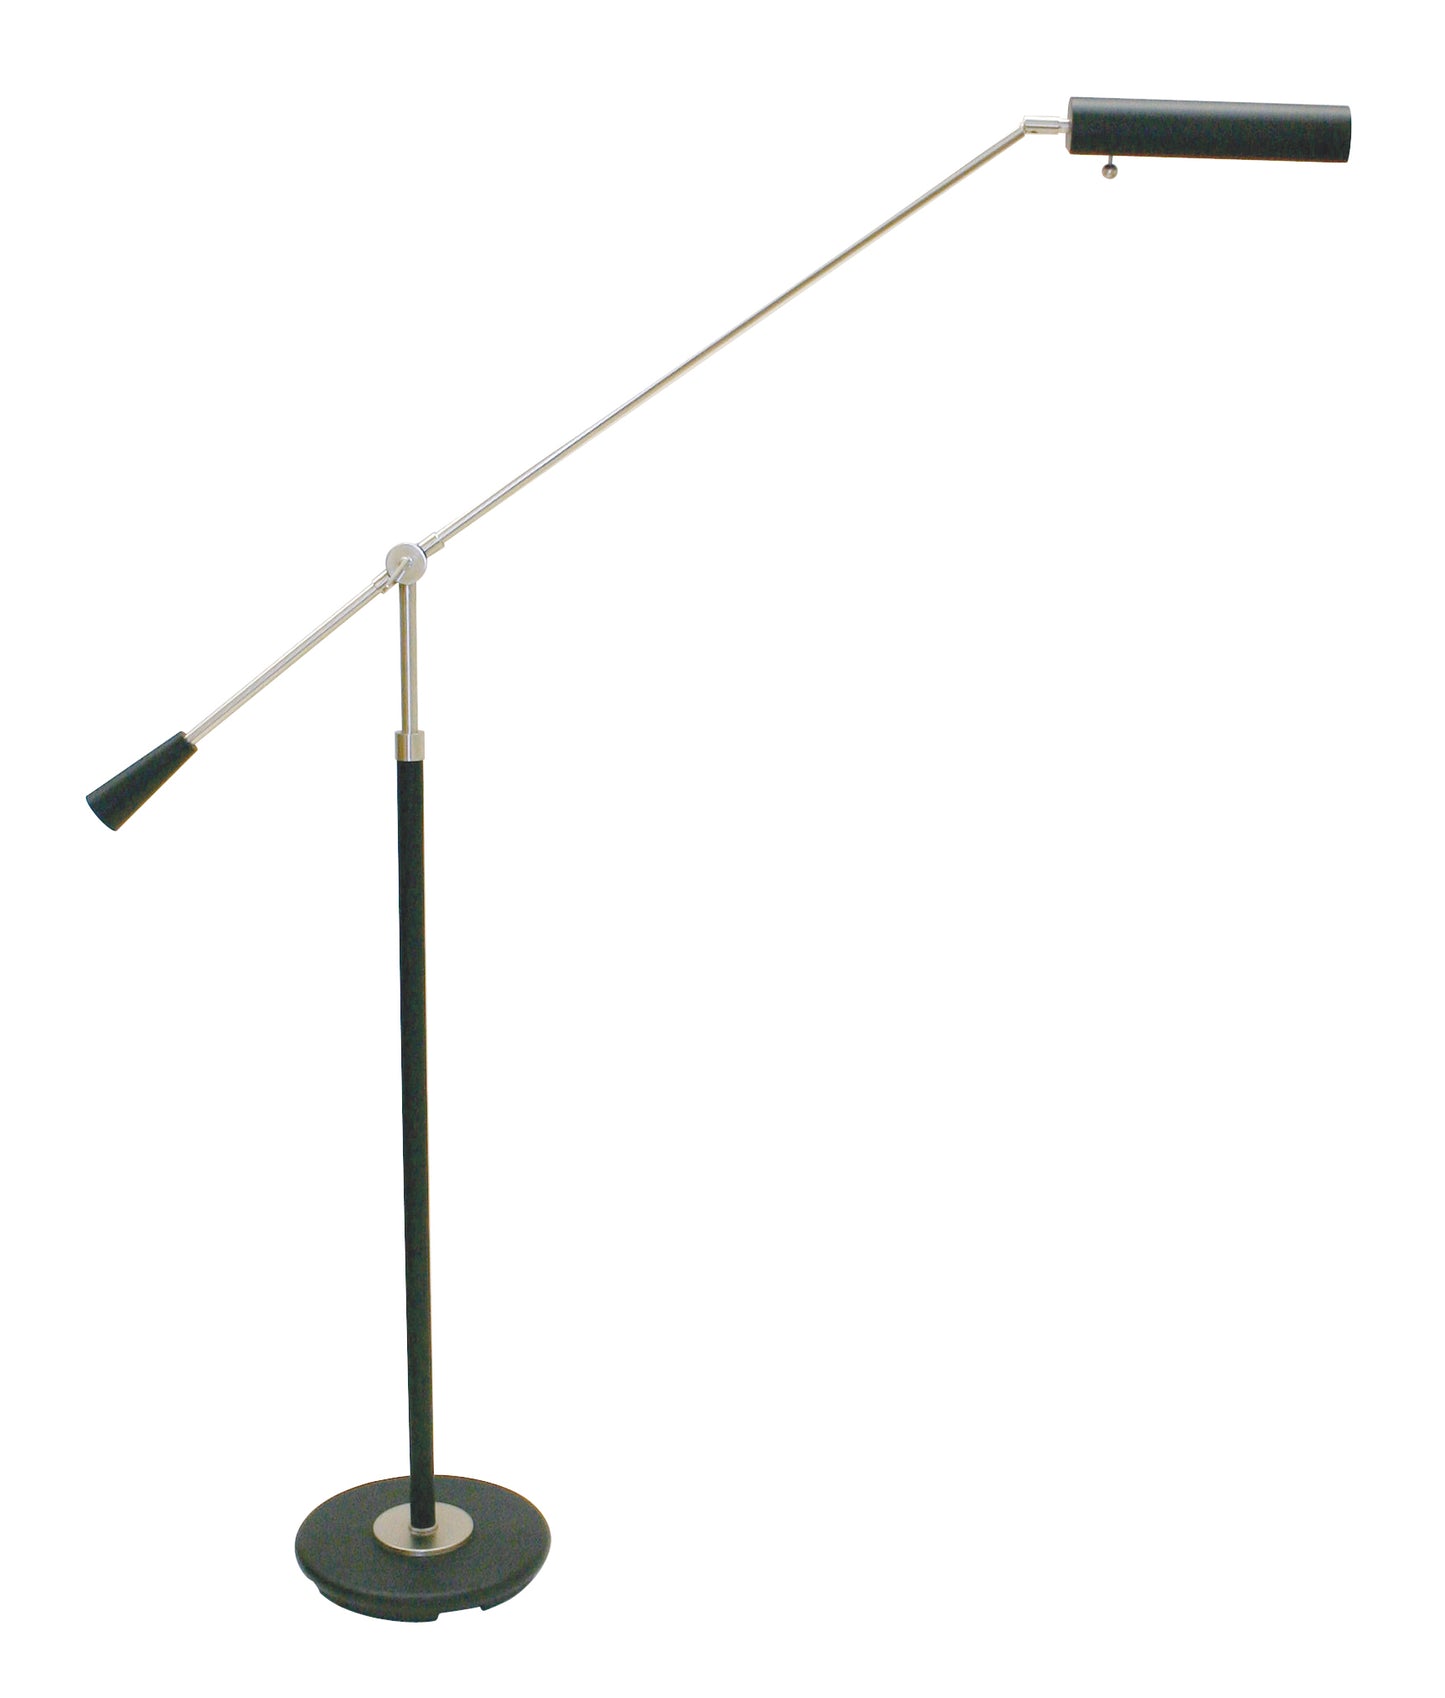 House of Troy Grand Piano Counter Balance Floor Lamp Black Satin Nickel Accents PFL-527